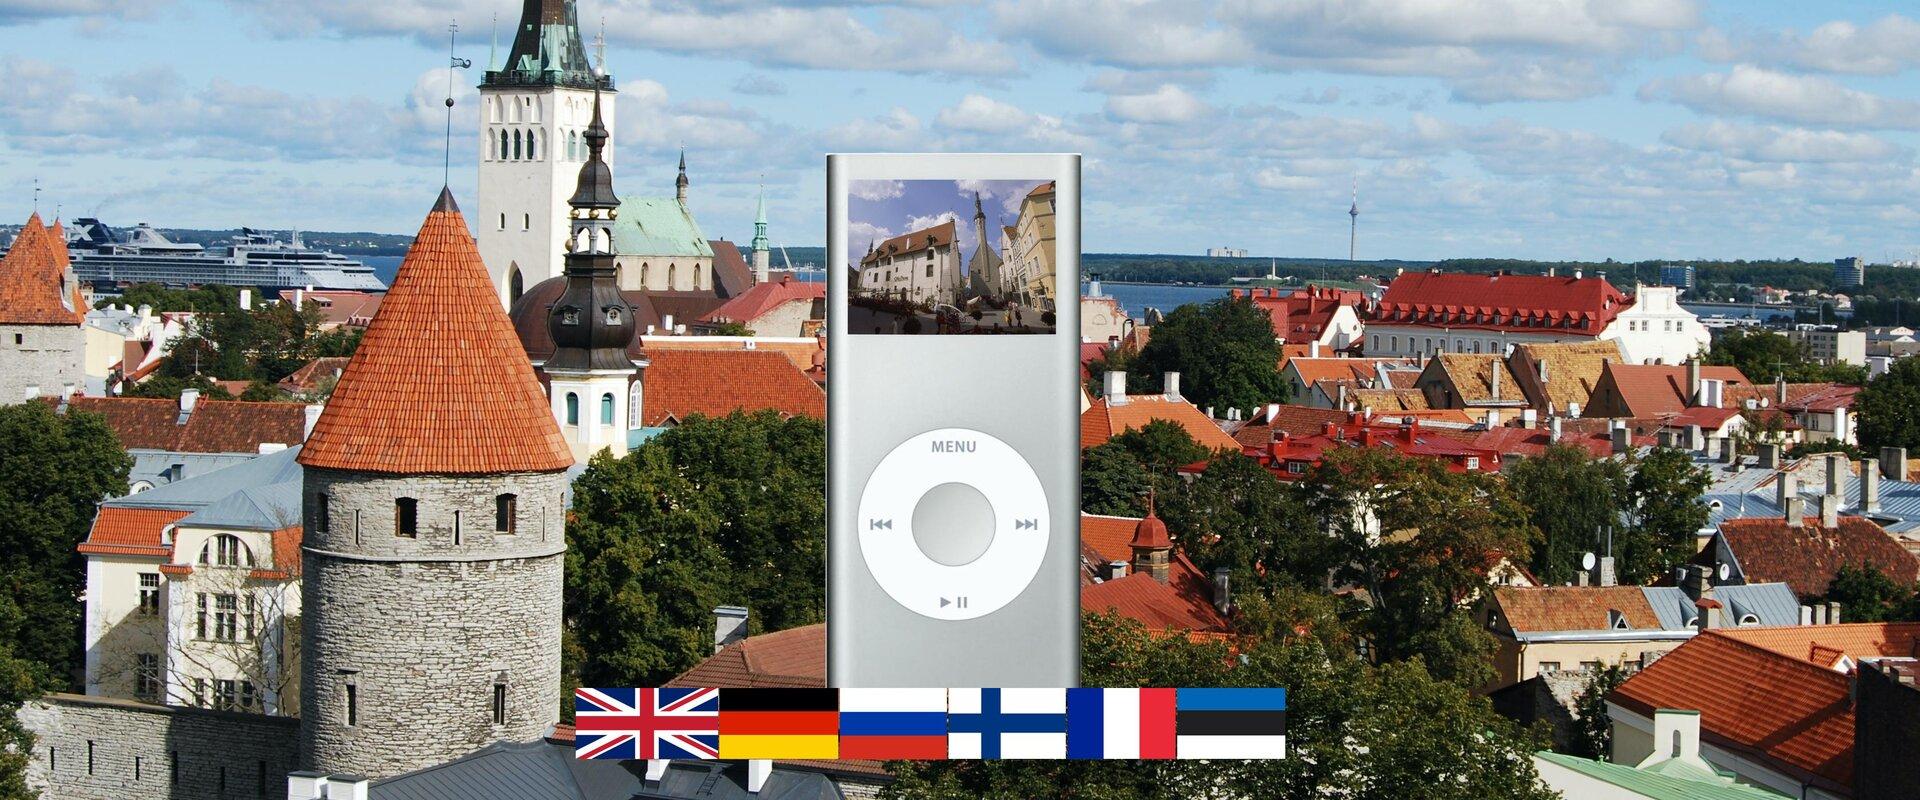 A walking tour with audio guide in the Old Town of Tallinn. Rent an iPod for up to 24 hours!